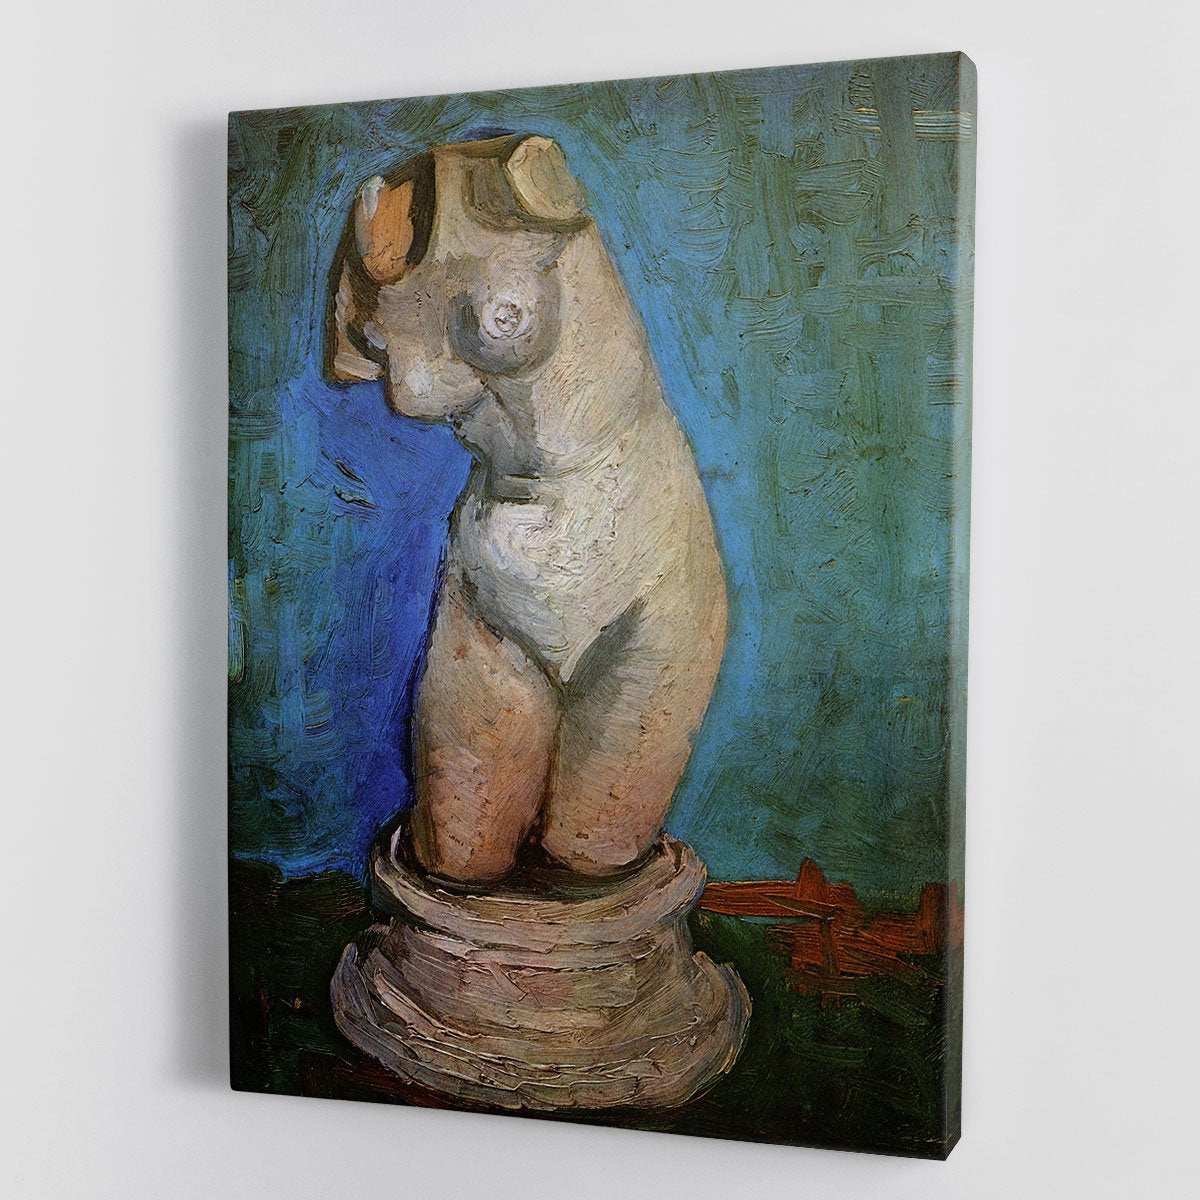 Plaster Statuette of a Female Torso 2 by Van Gogh Canvas Print or Poster